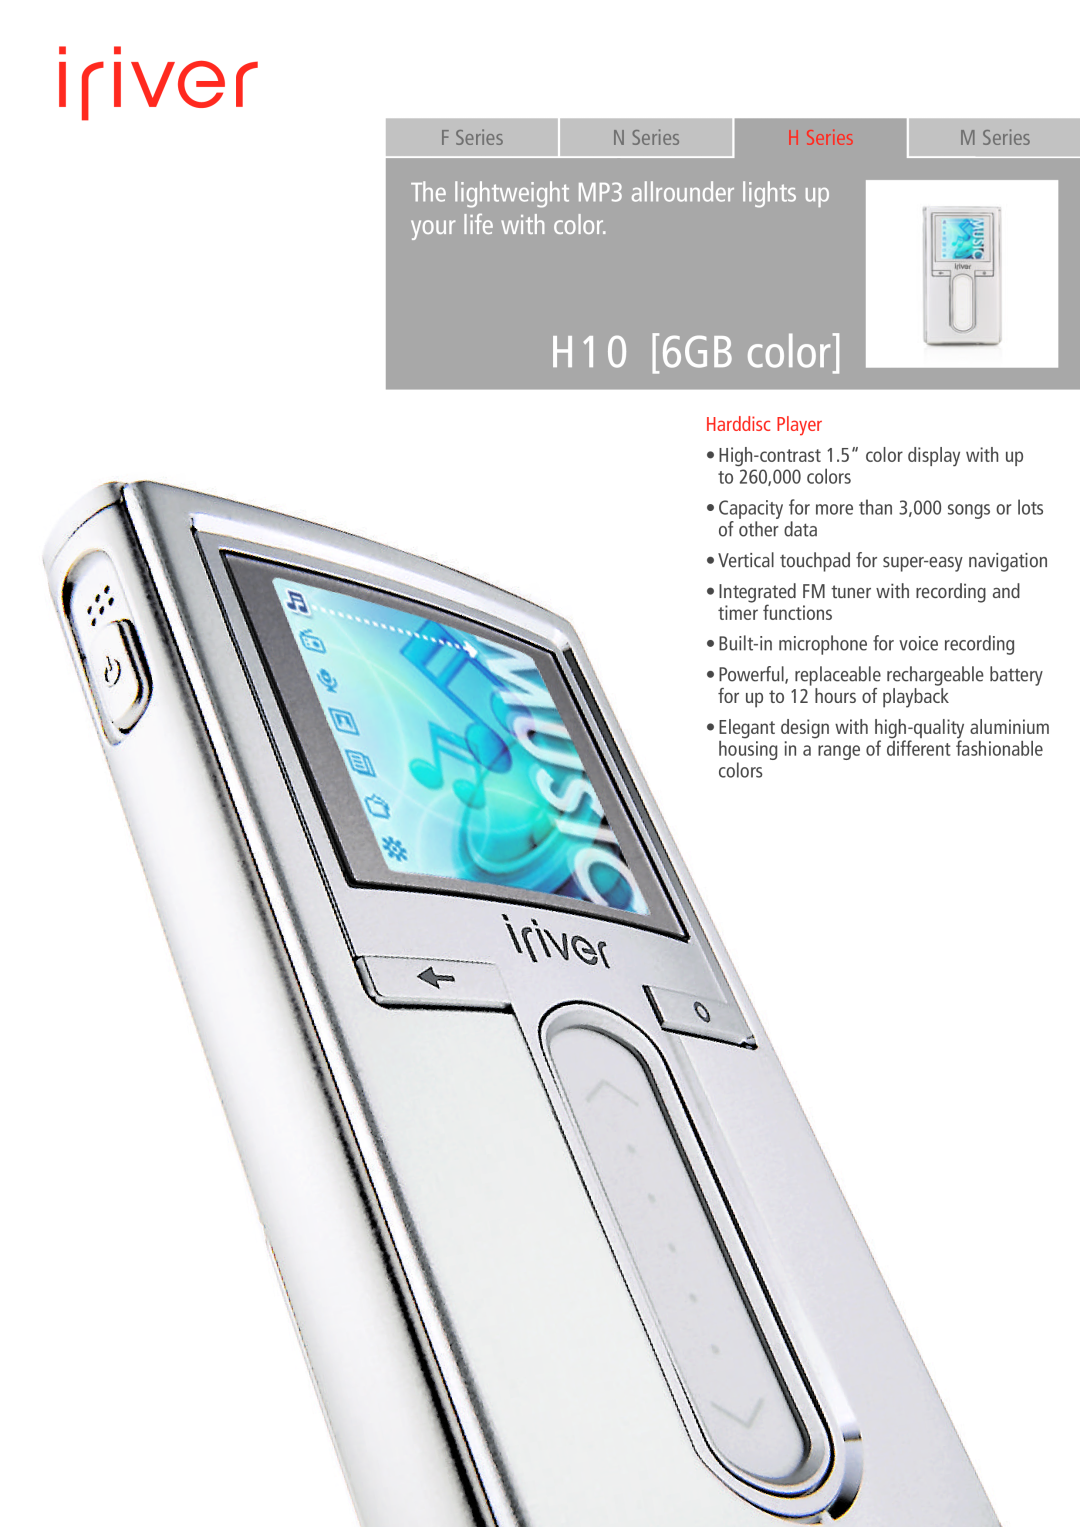 IRiver manual H10 6GB color, The lightweight MP3 allrounder lights up your life with color, F Series, N Series 